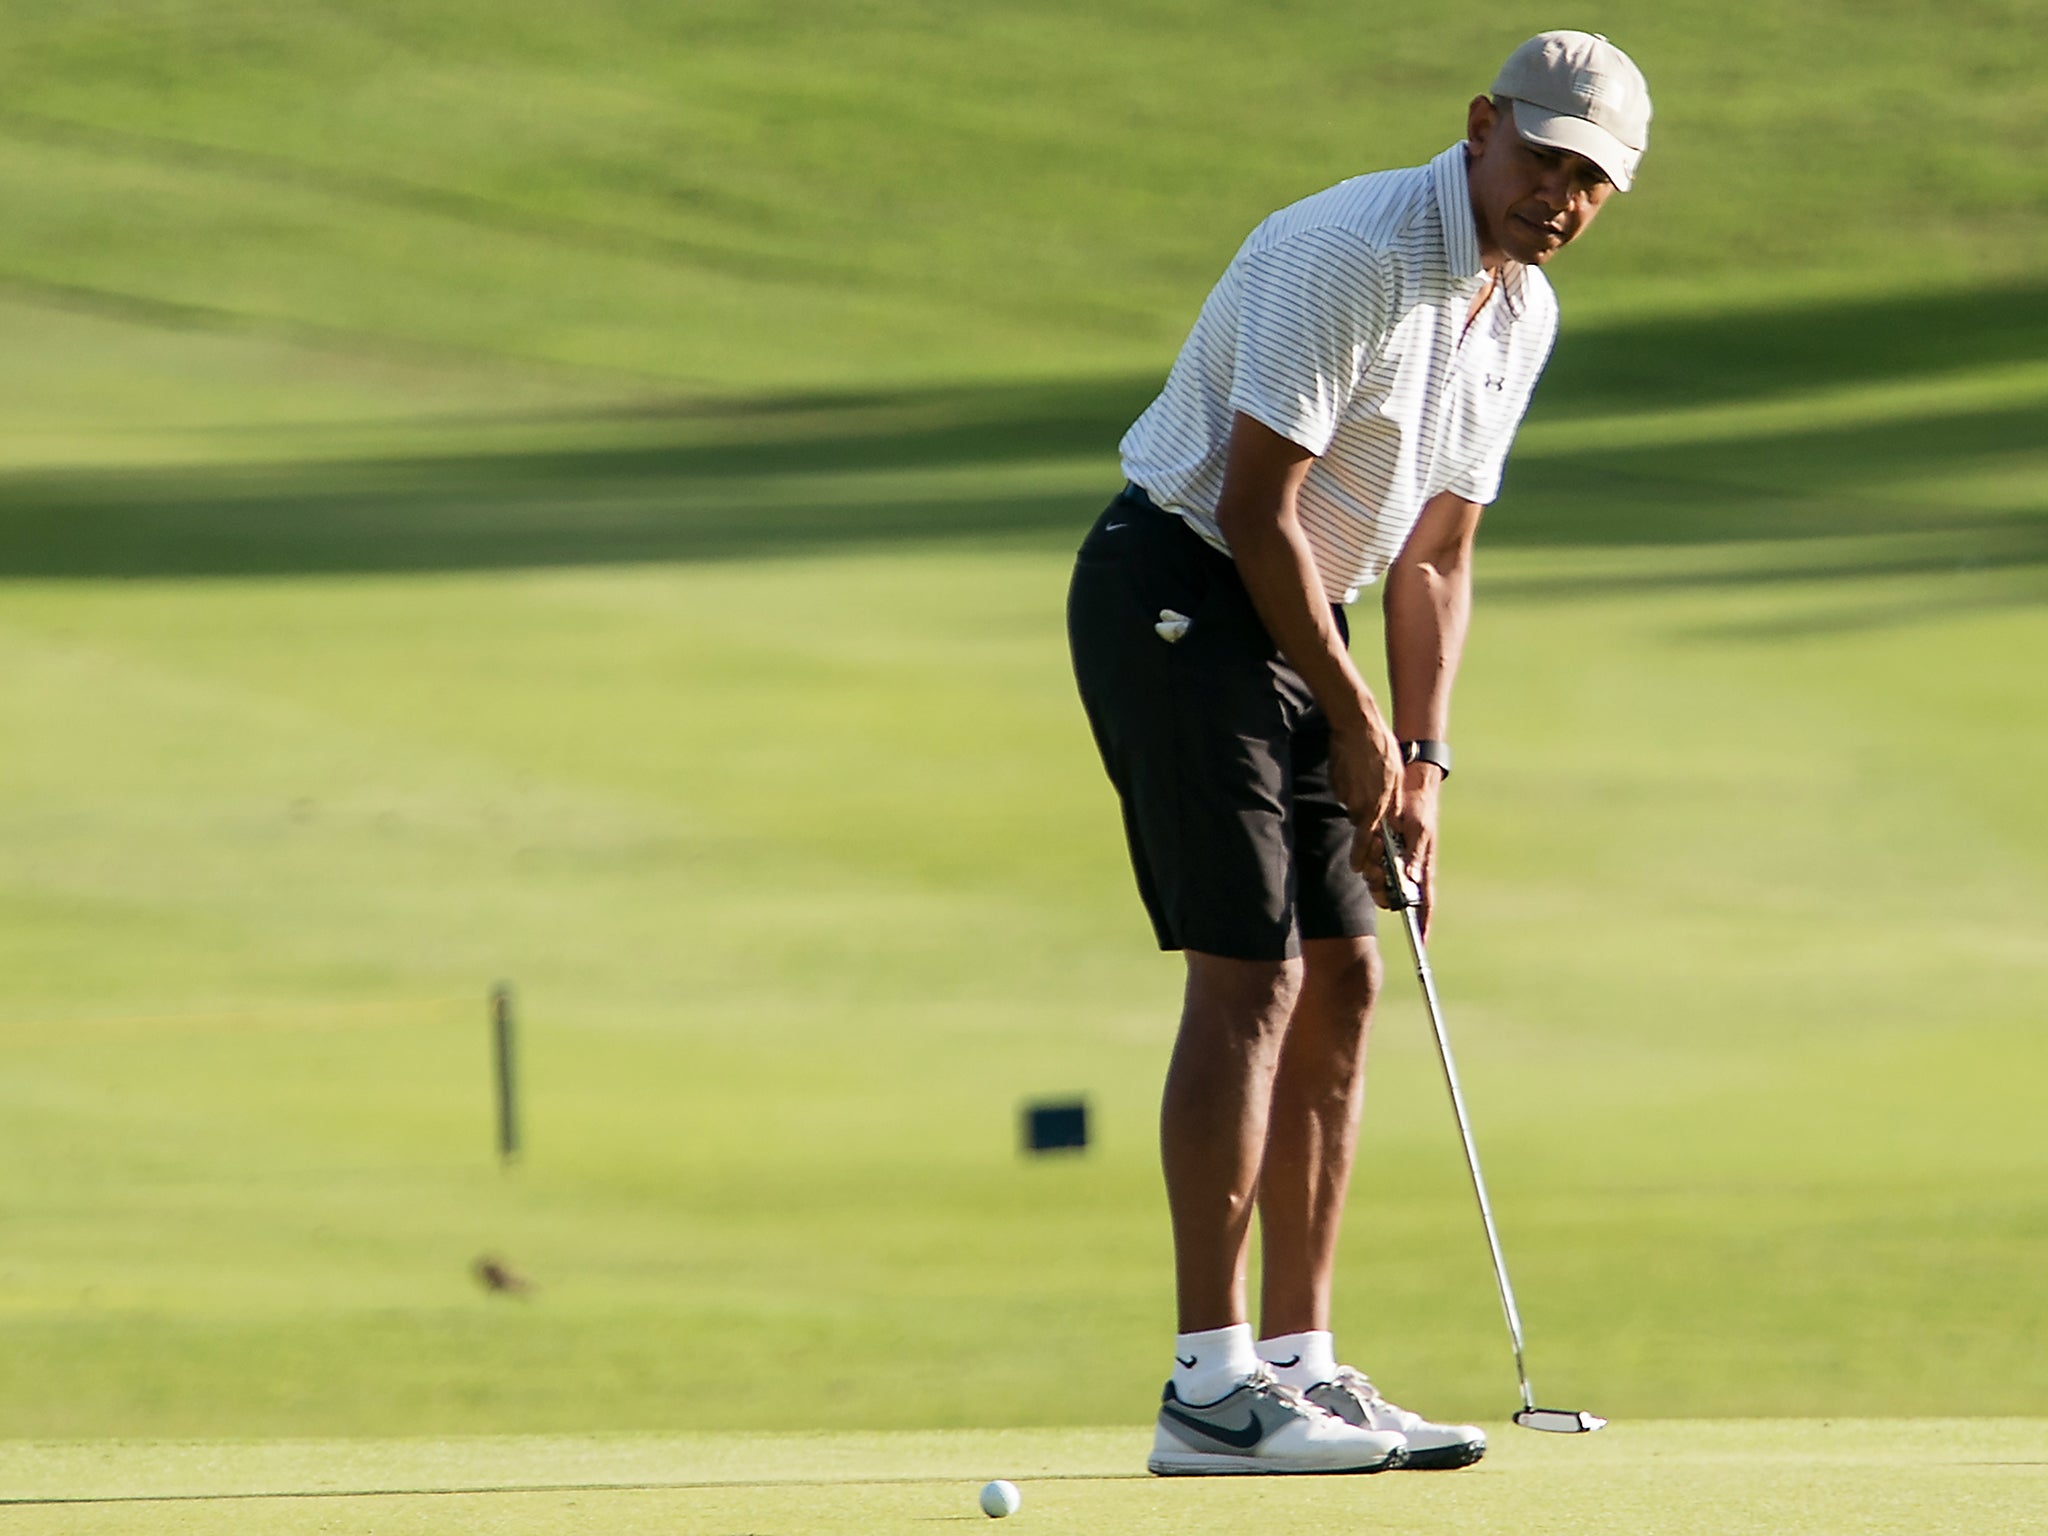 President Obama faces being refused membership to Woodmont Country Club in Maryland, where he has played several times before, due to his decision to abstain from a UN security council resolution criticising Israeli settlements, according to reports